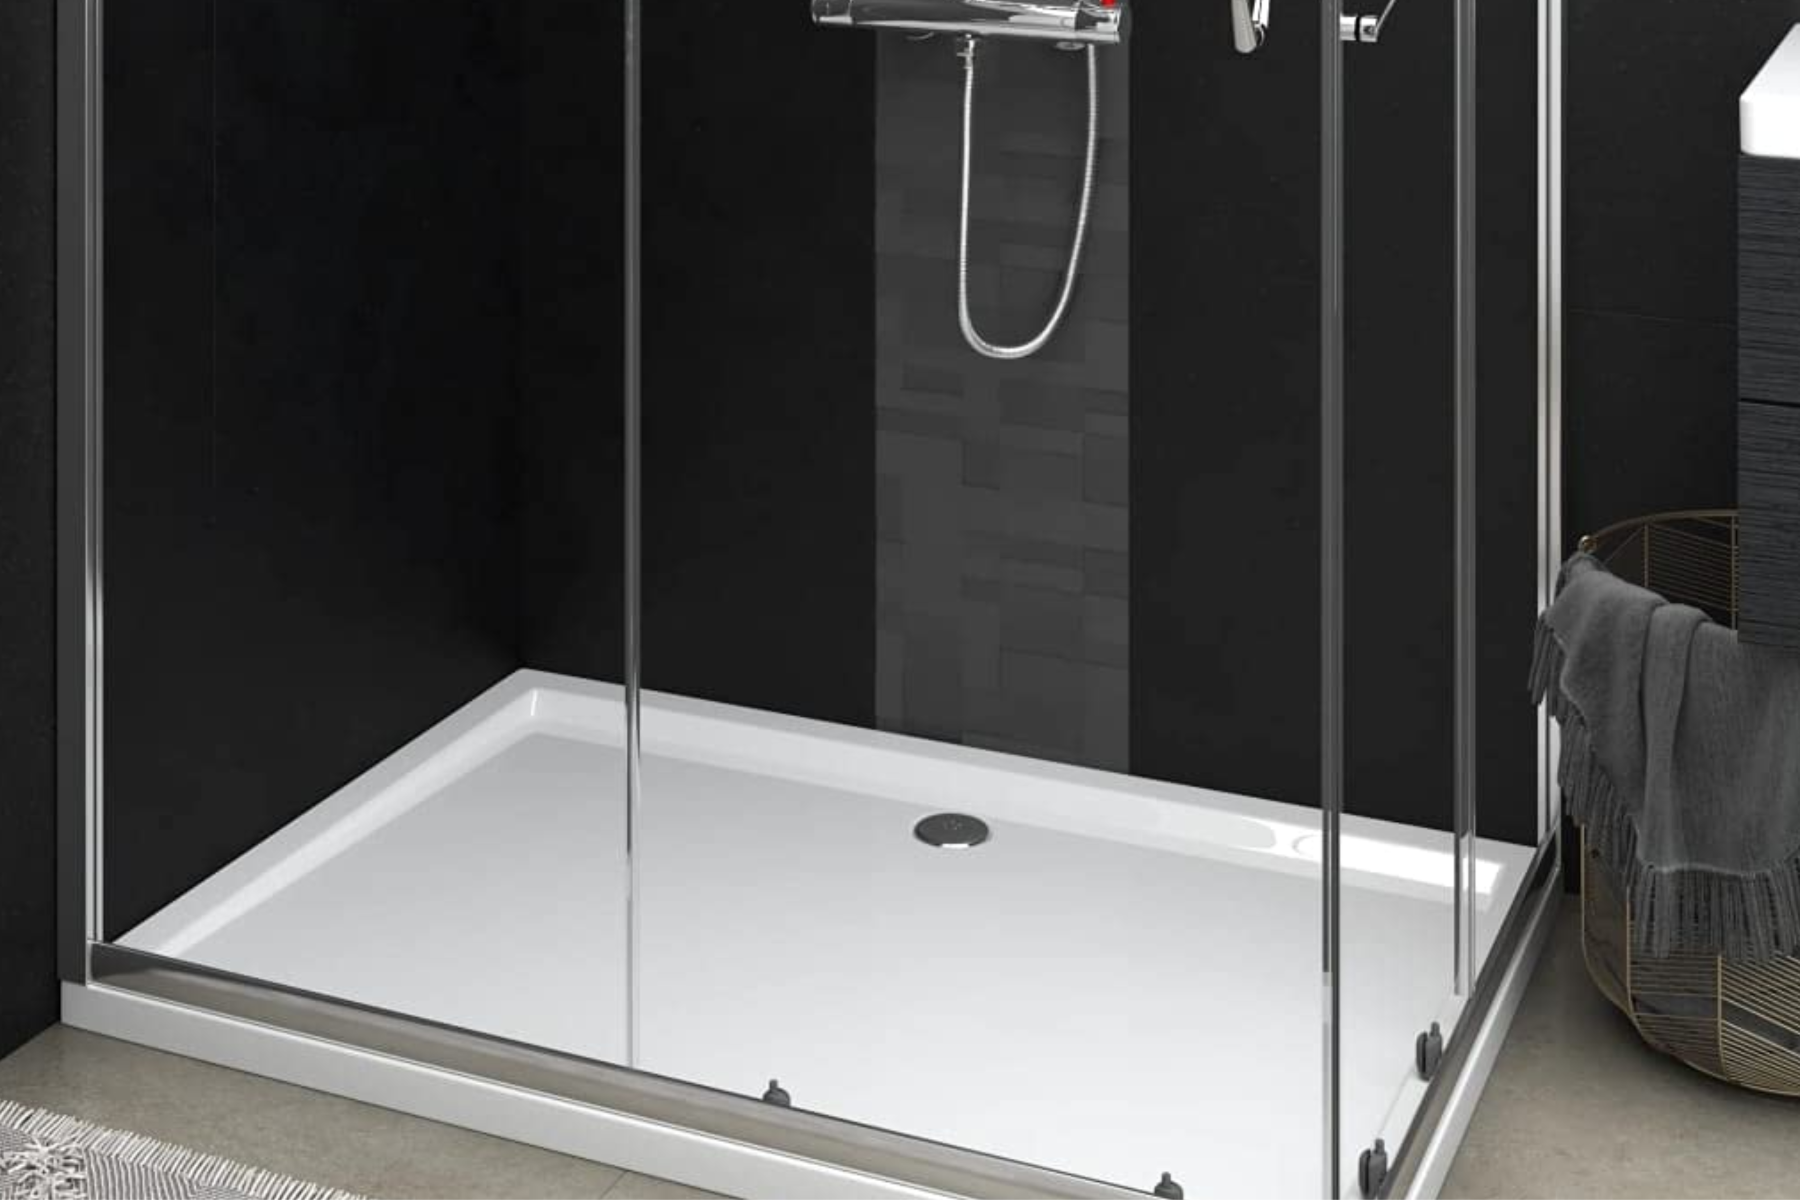 Retangular Shower Tray In Shower Space In Thermostatic Shower